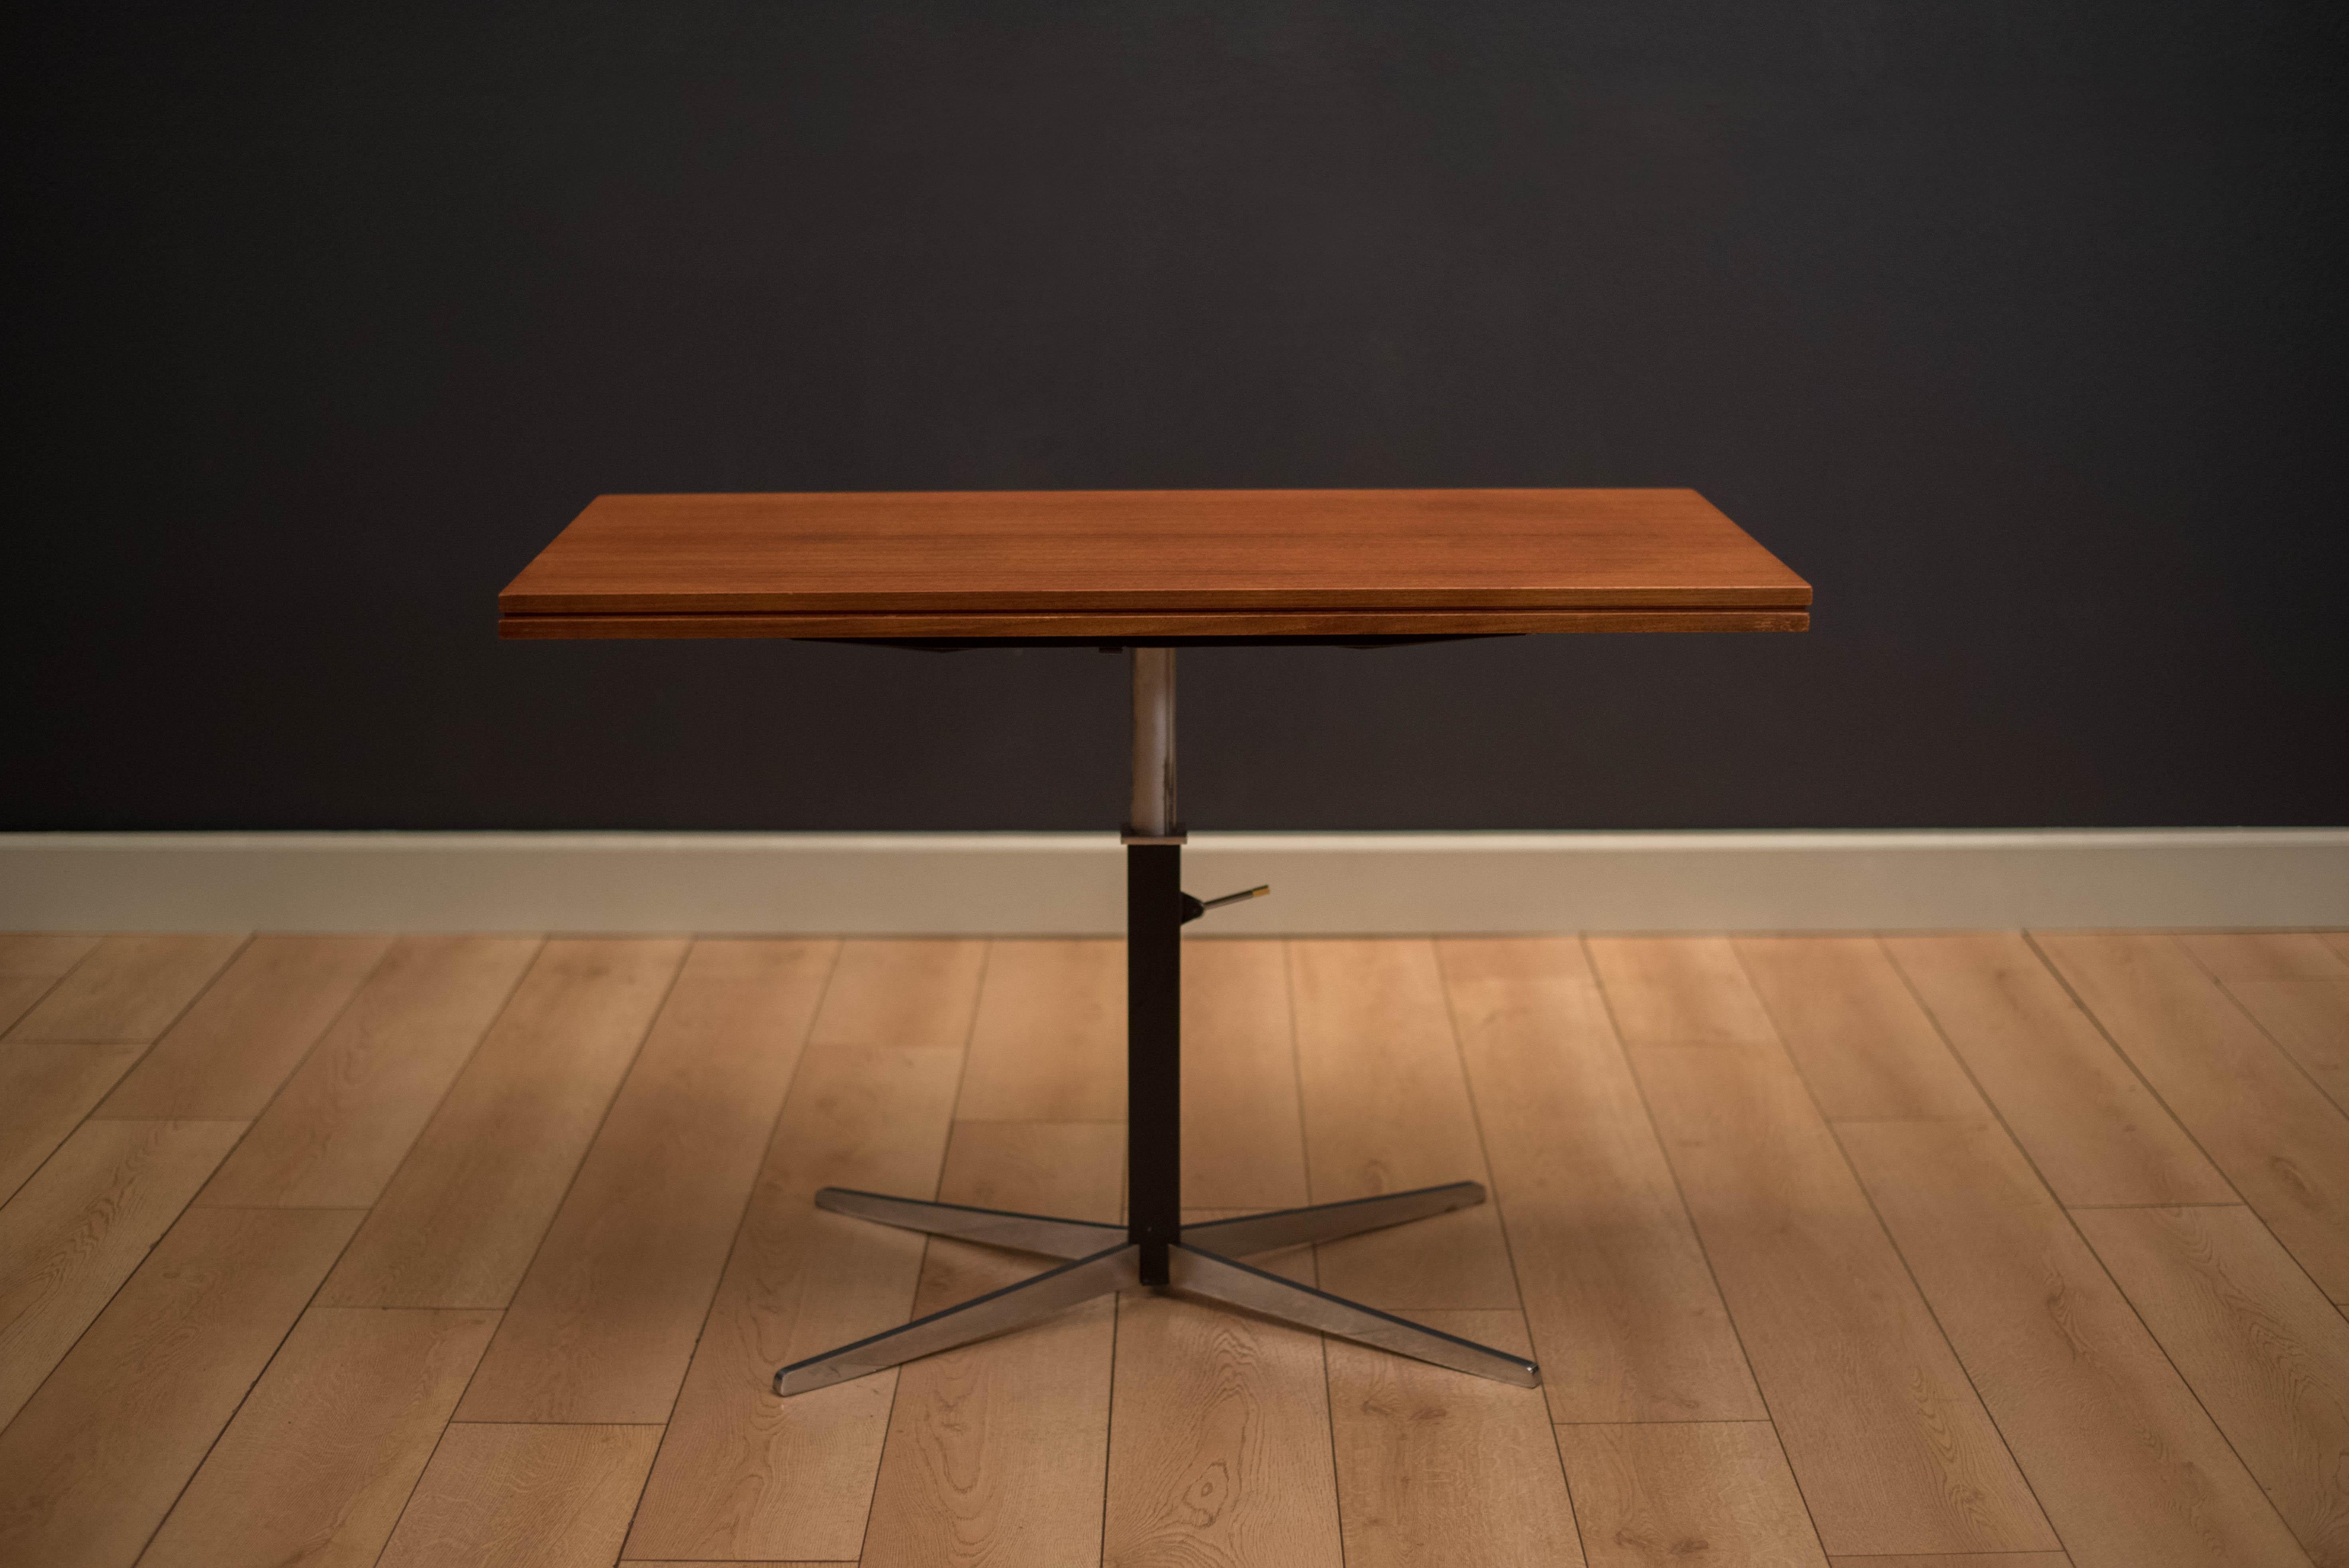 Mid century adjustable elevator flip top table designed by J.M. Thomas for Wilhelm Renz. This versatile piece can convert from a coffee table to a dining table by adjusting the height of the aluminum base. Teak finished table top slides over to